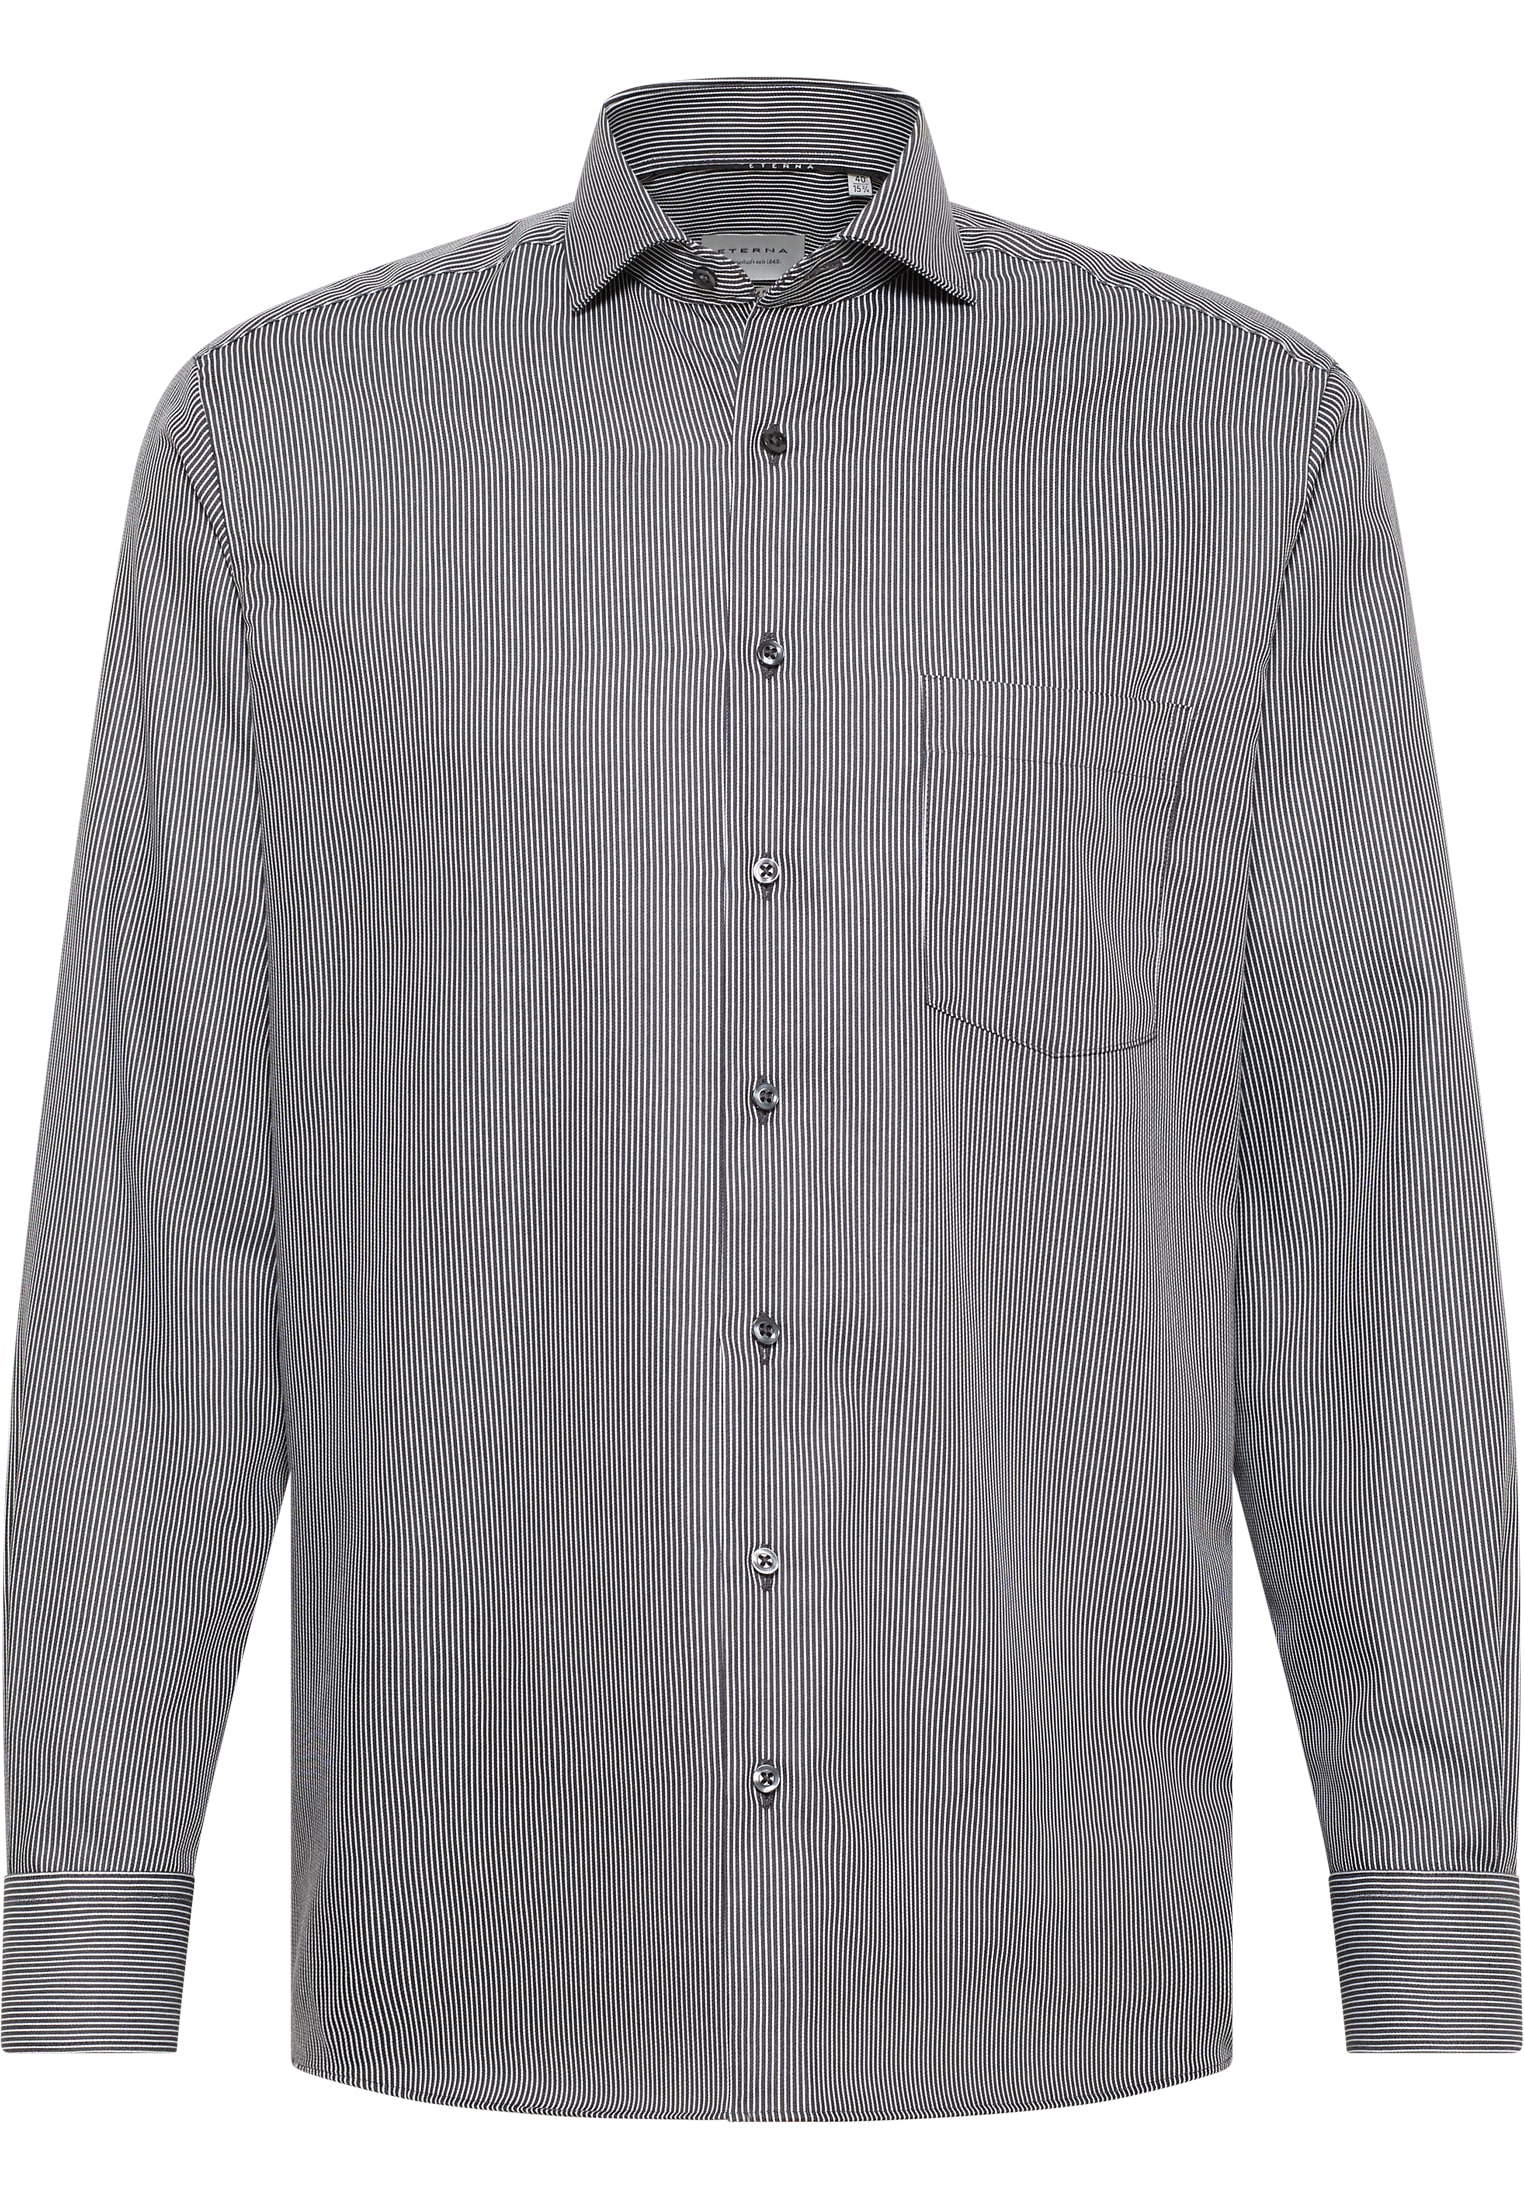 MODERN FIT Shirt in anthracite striped